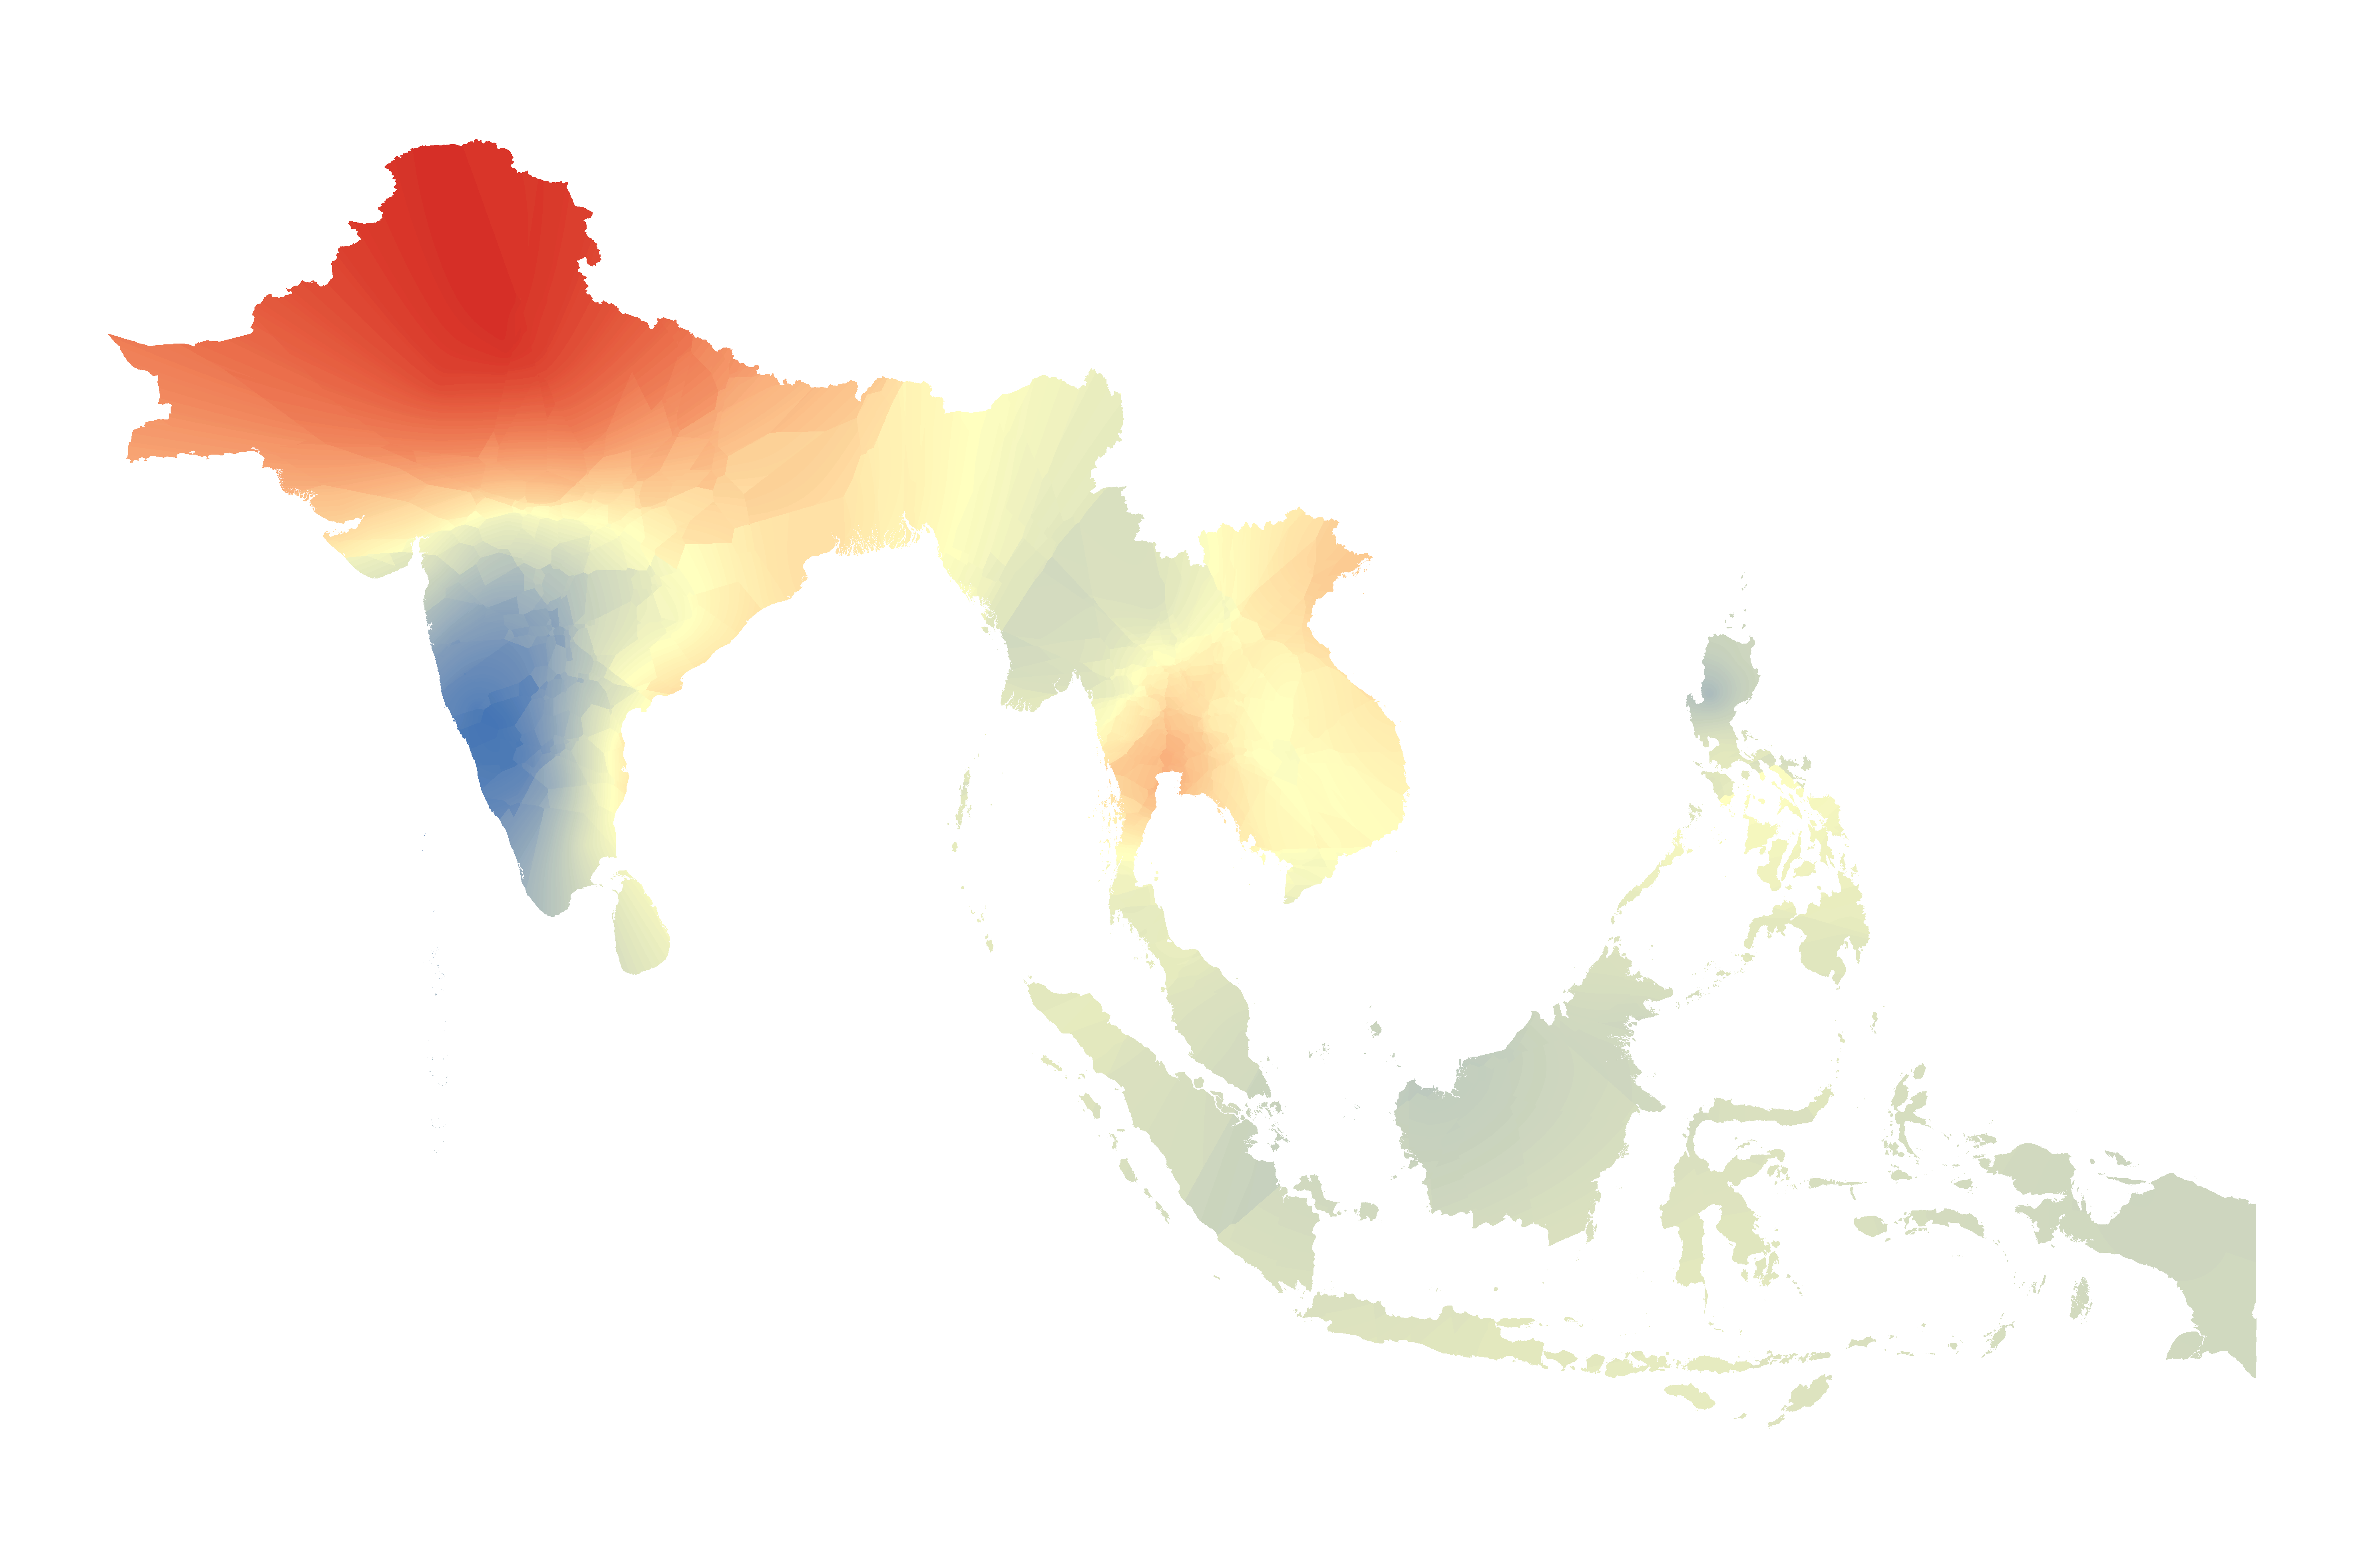 Monthly total precipitation monitoring data set for South Asia and southeast Asia(1989-2018)